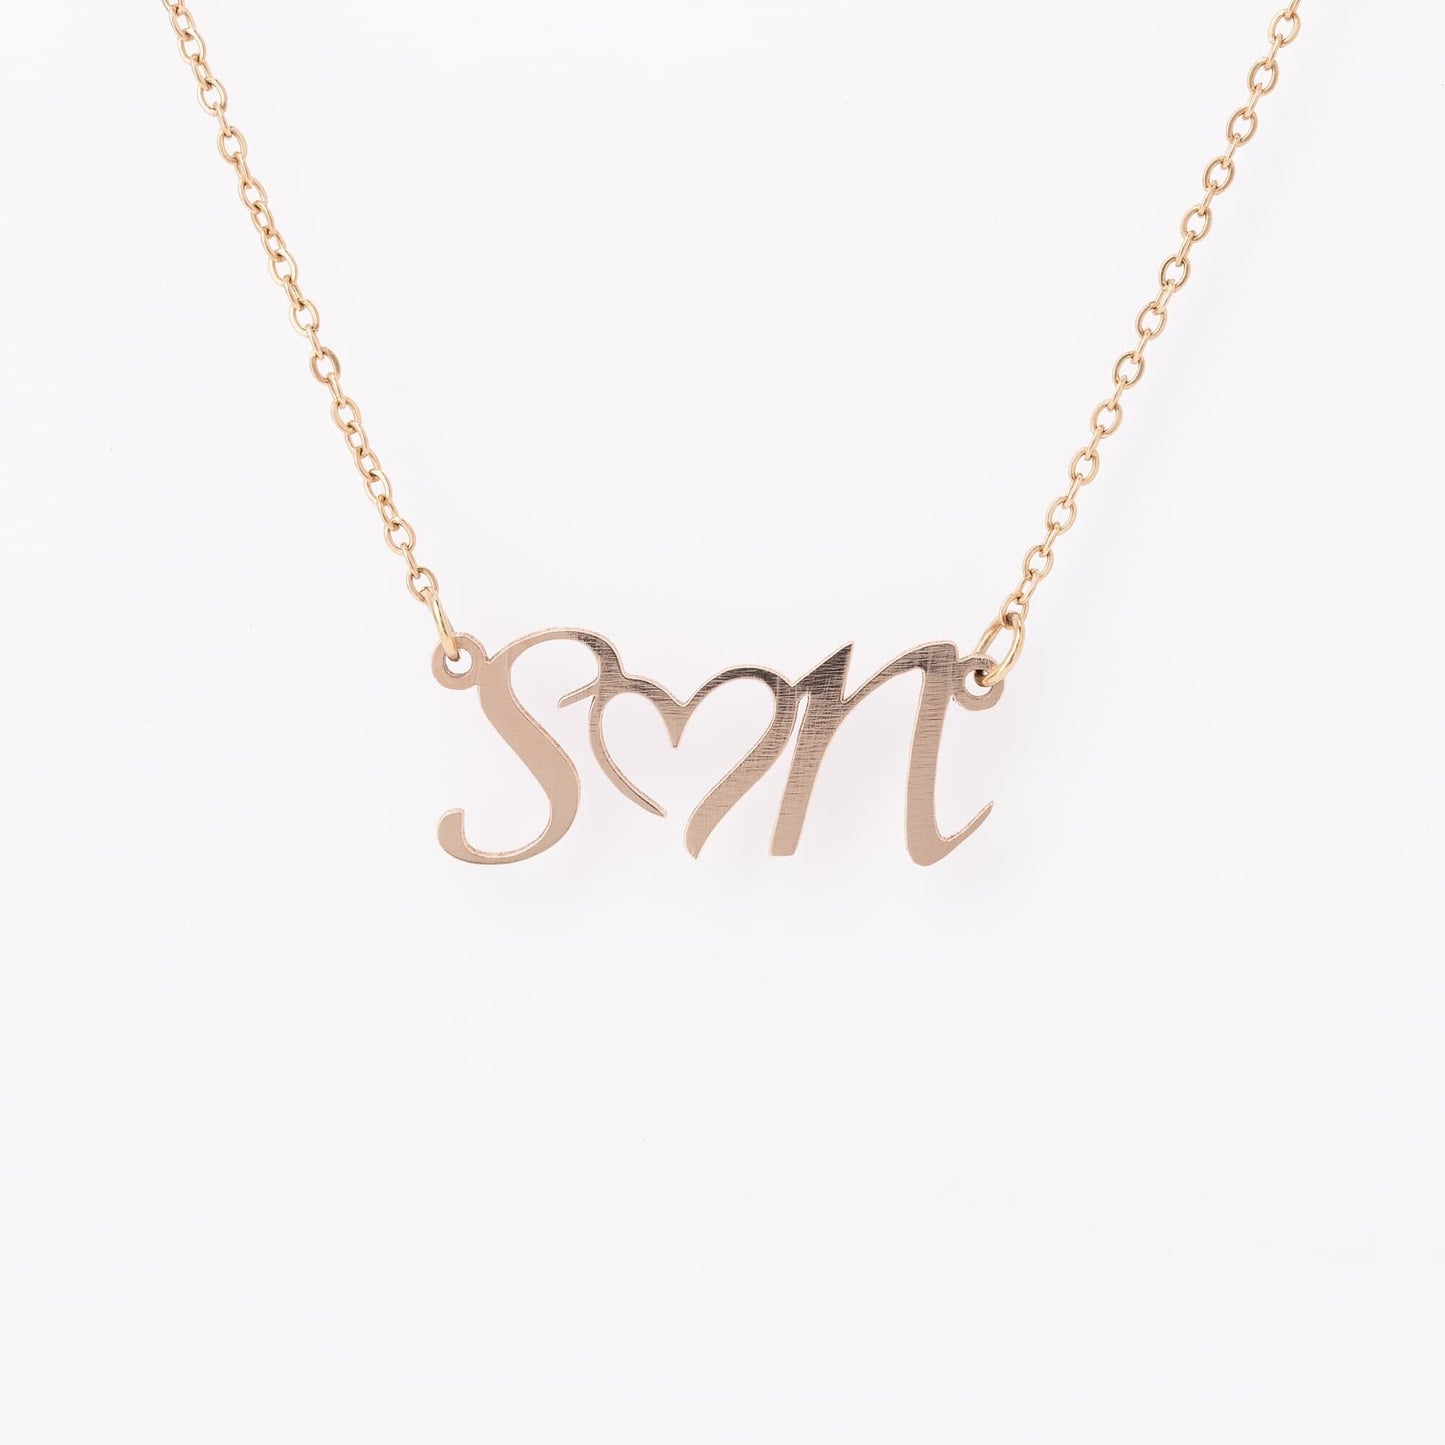 Personalized Heart Necklace With Initials - HGF#227HI Jewelry Rose Gold 